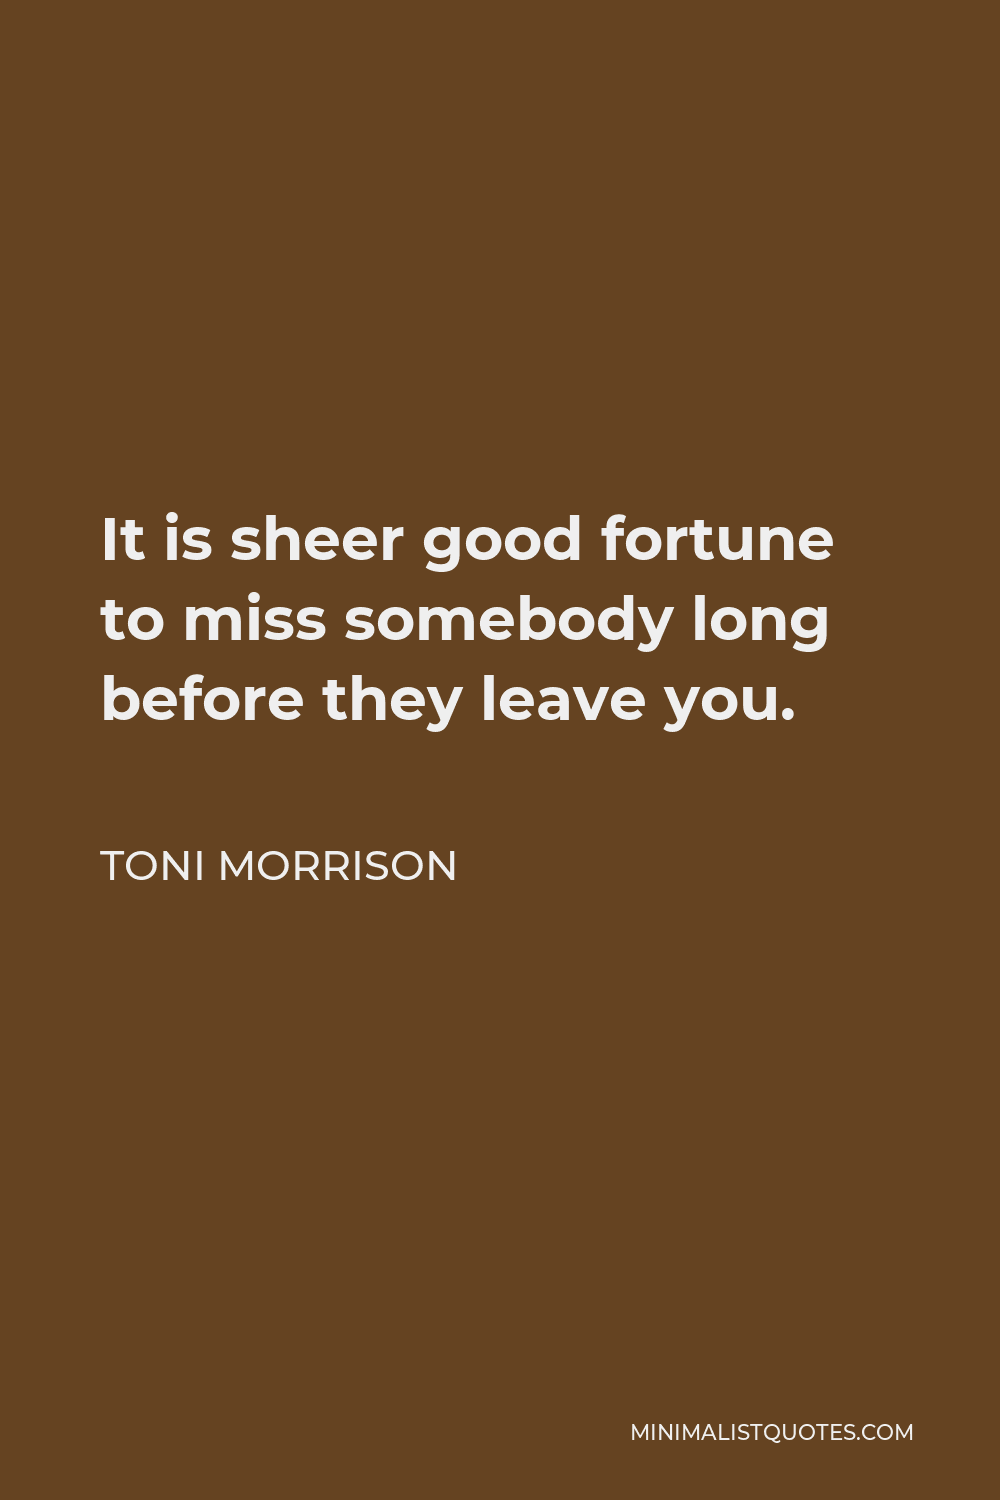 Toni Morrison Quote - It is sheer good fortune to miss somebody long before they leave you.